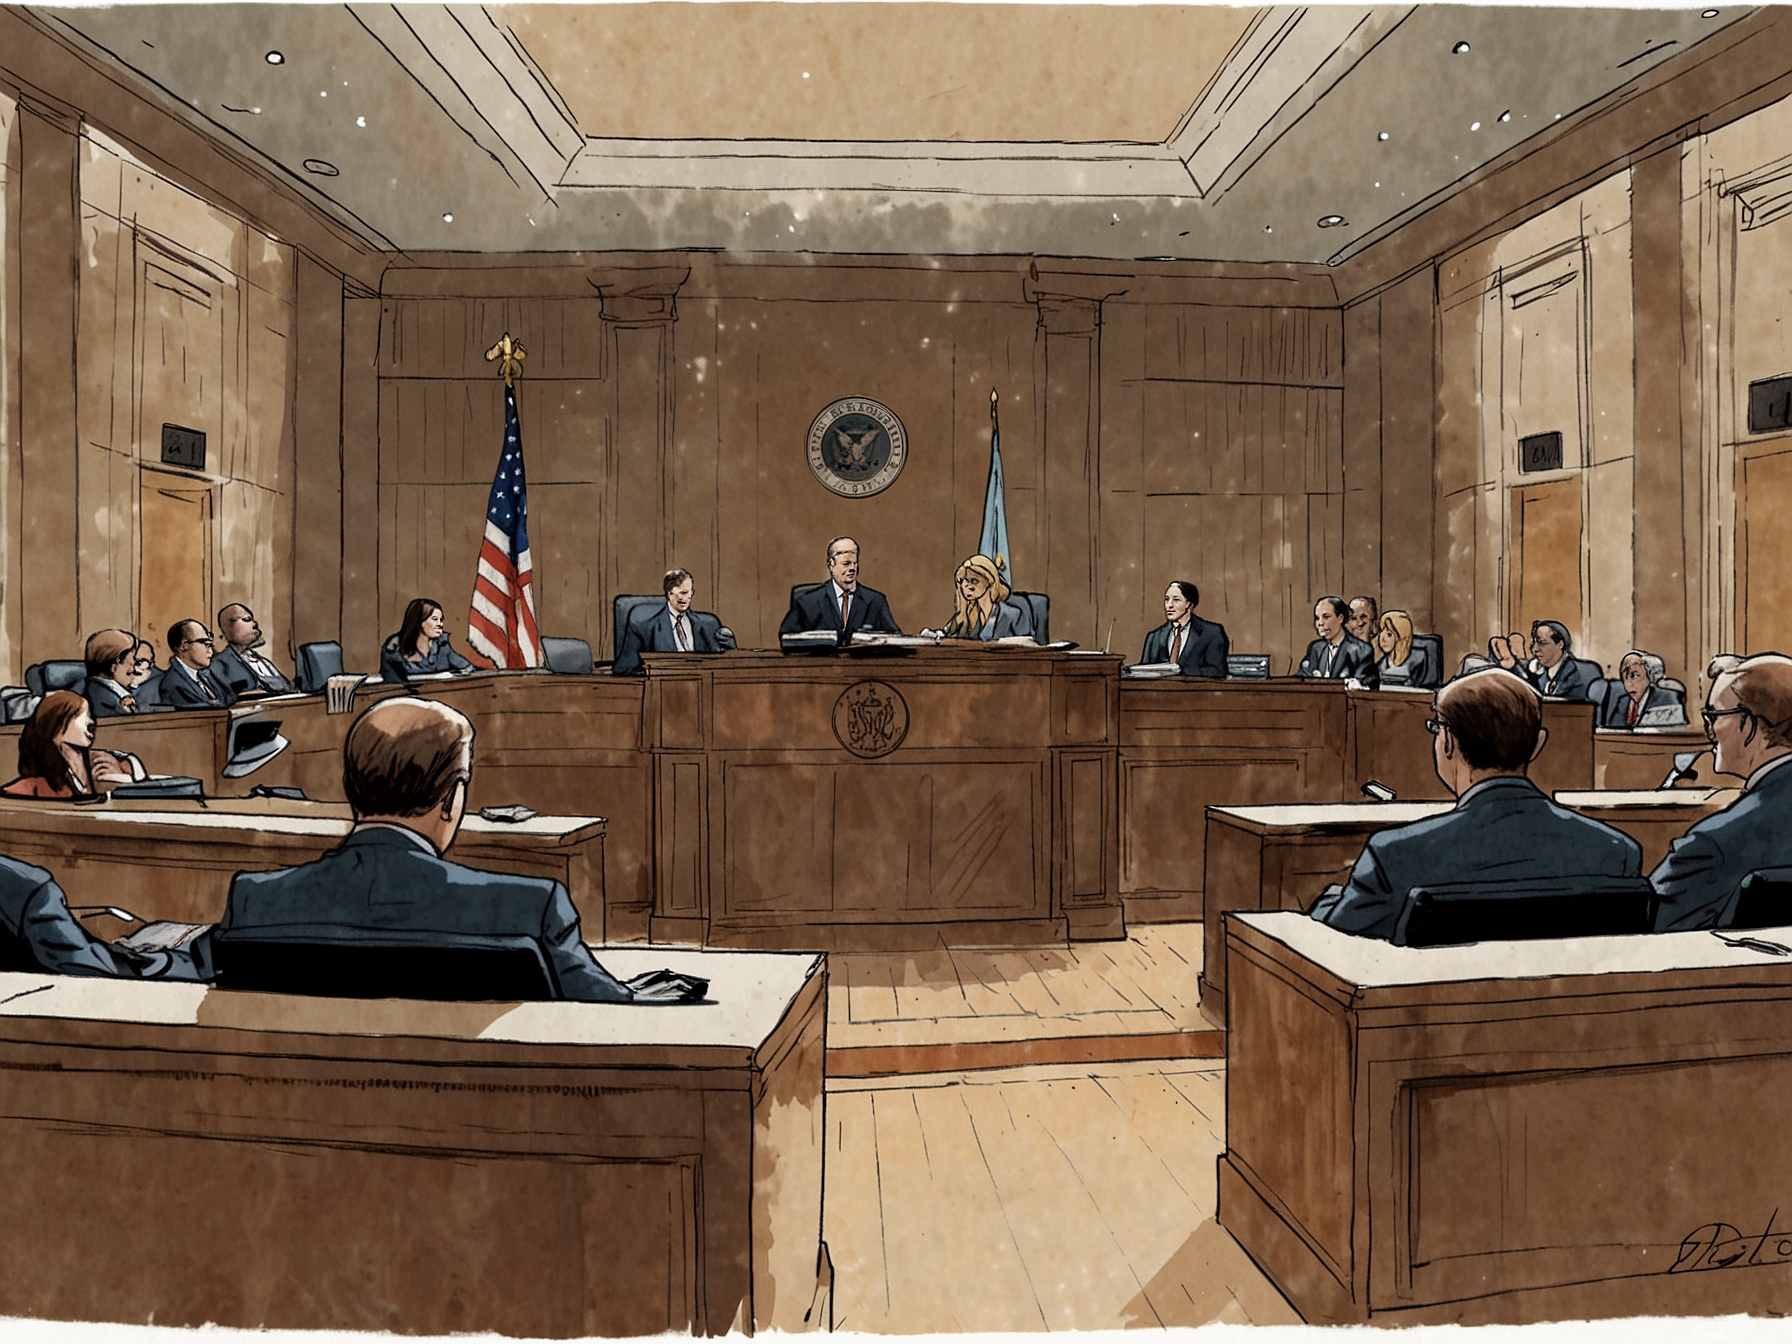 An image showing a courtroom scene with the Boeing logo in the background, representing the ongoing legal battles and the Justice Department's push for a guilty plea.